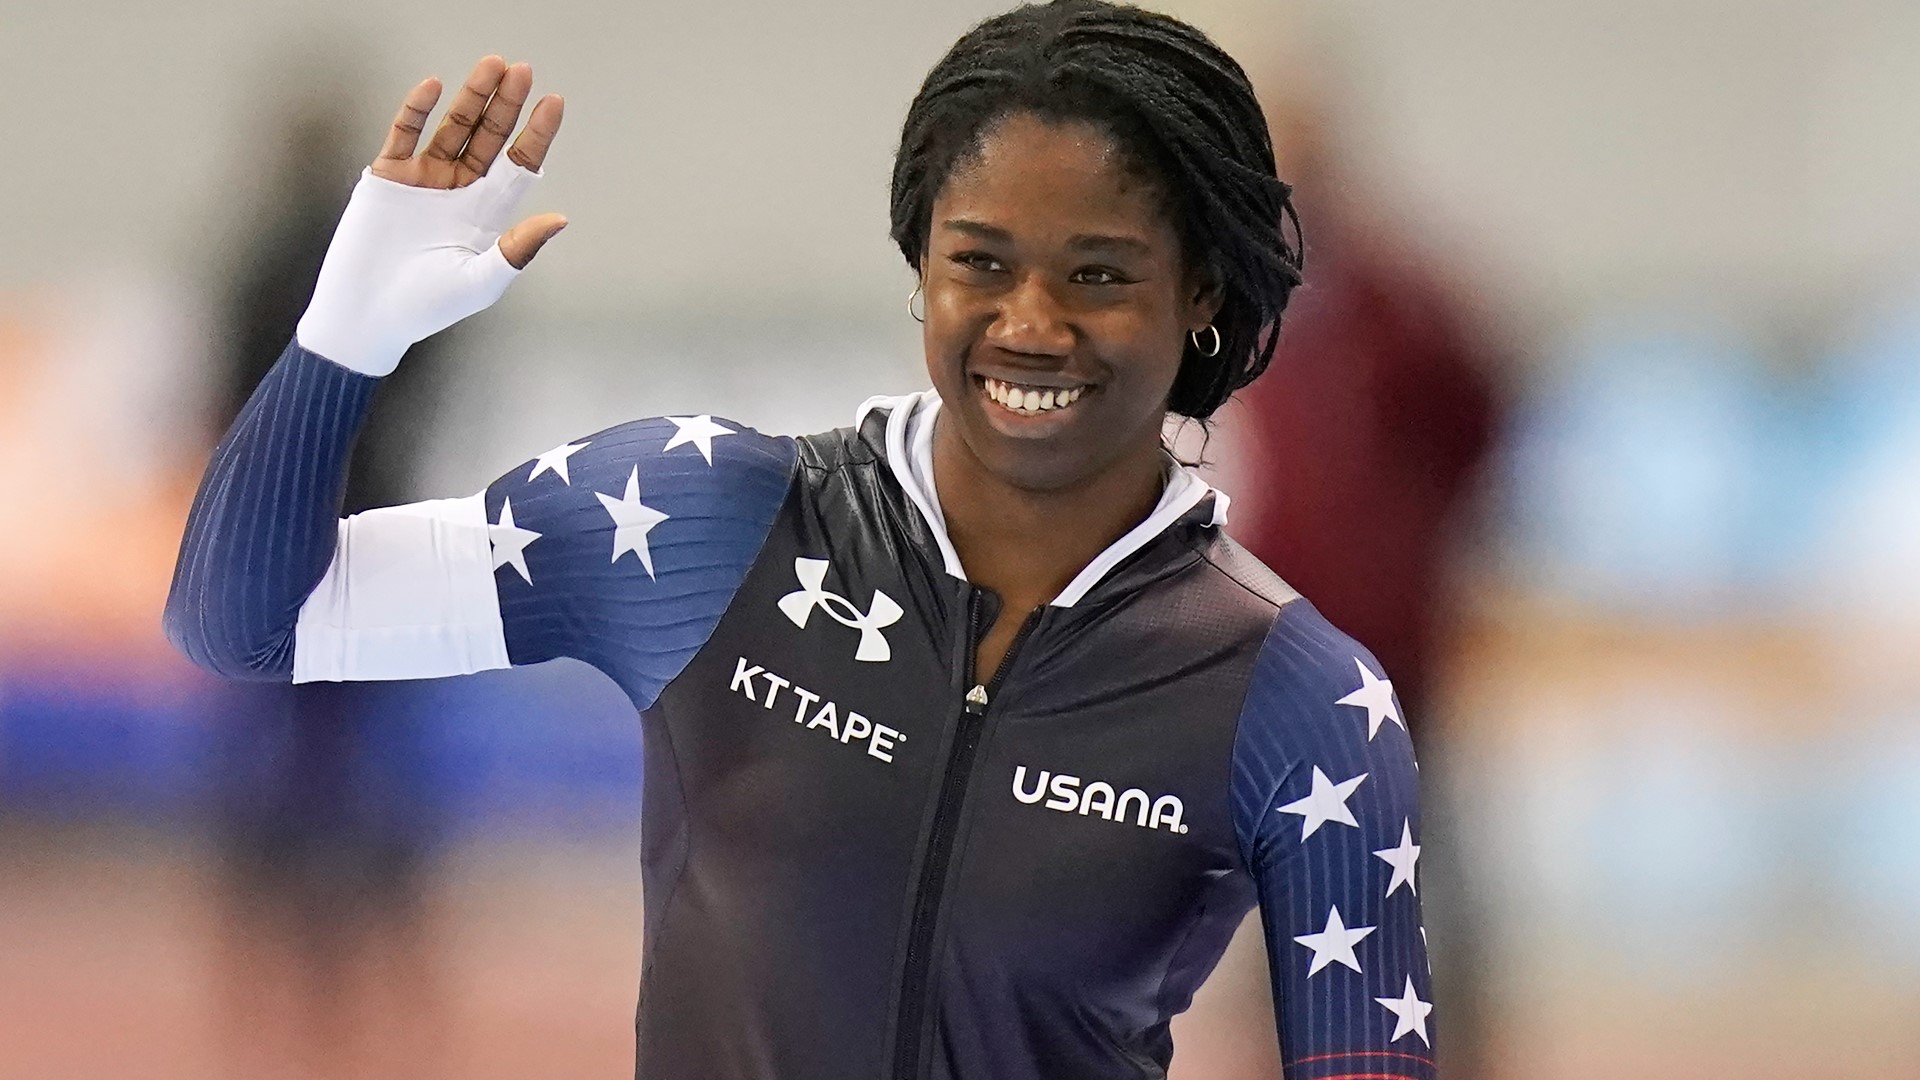 Jackson Profile was the first black American woman to compete at the Olympics in long track speed skating.